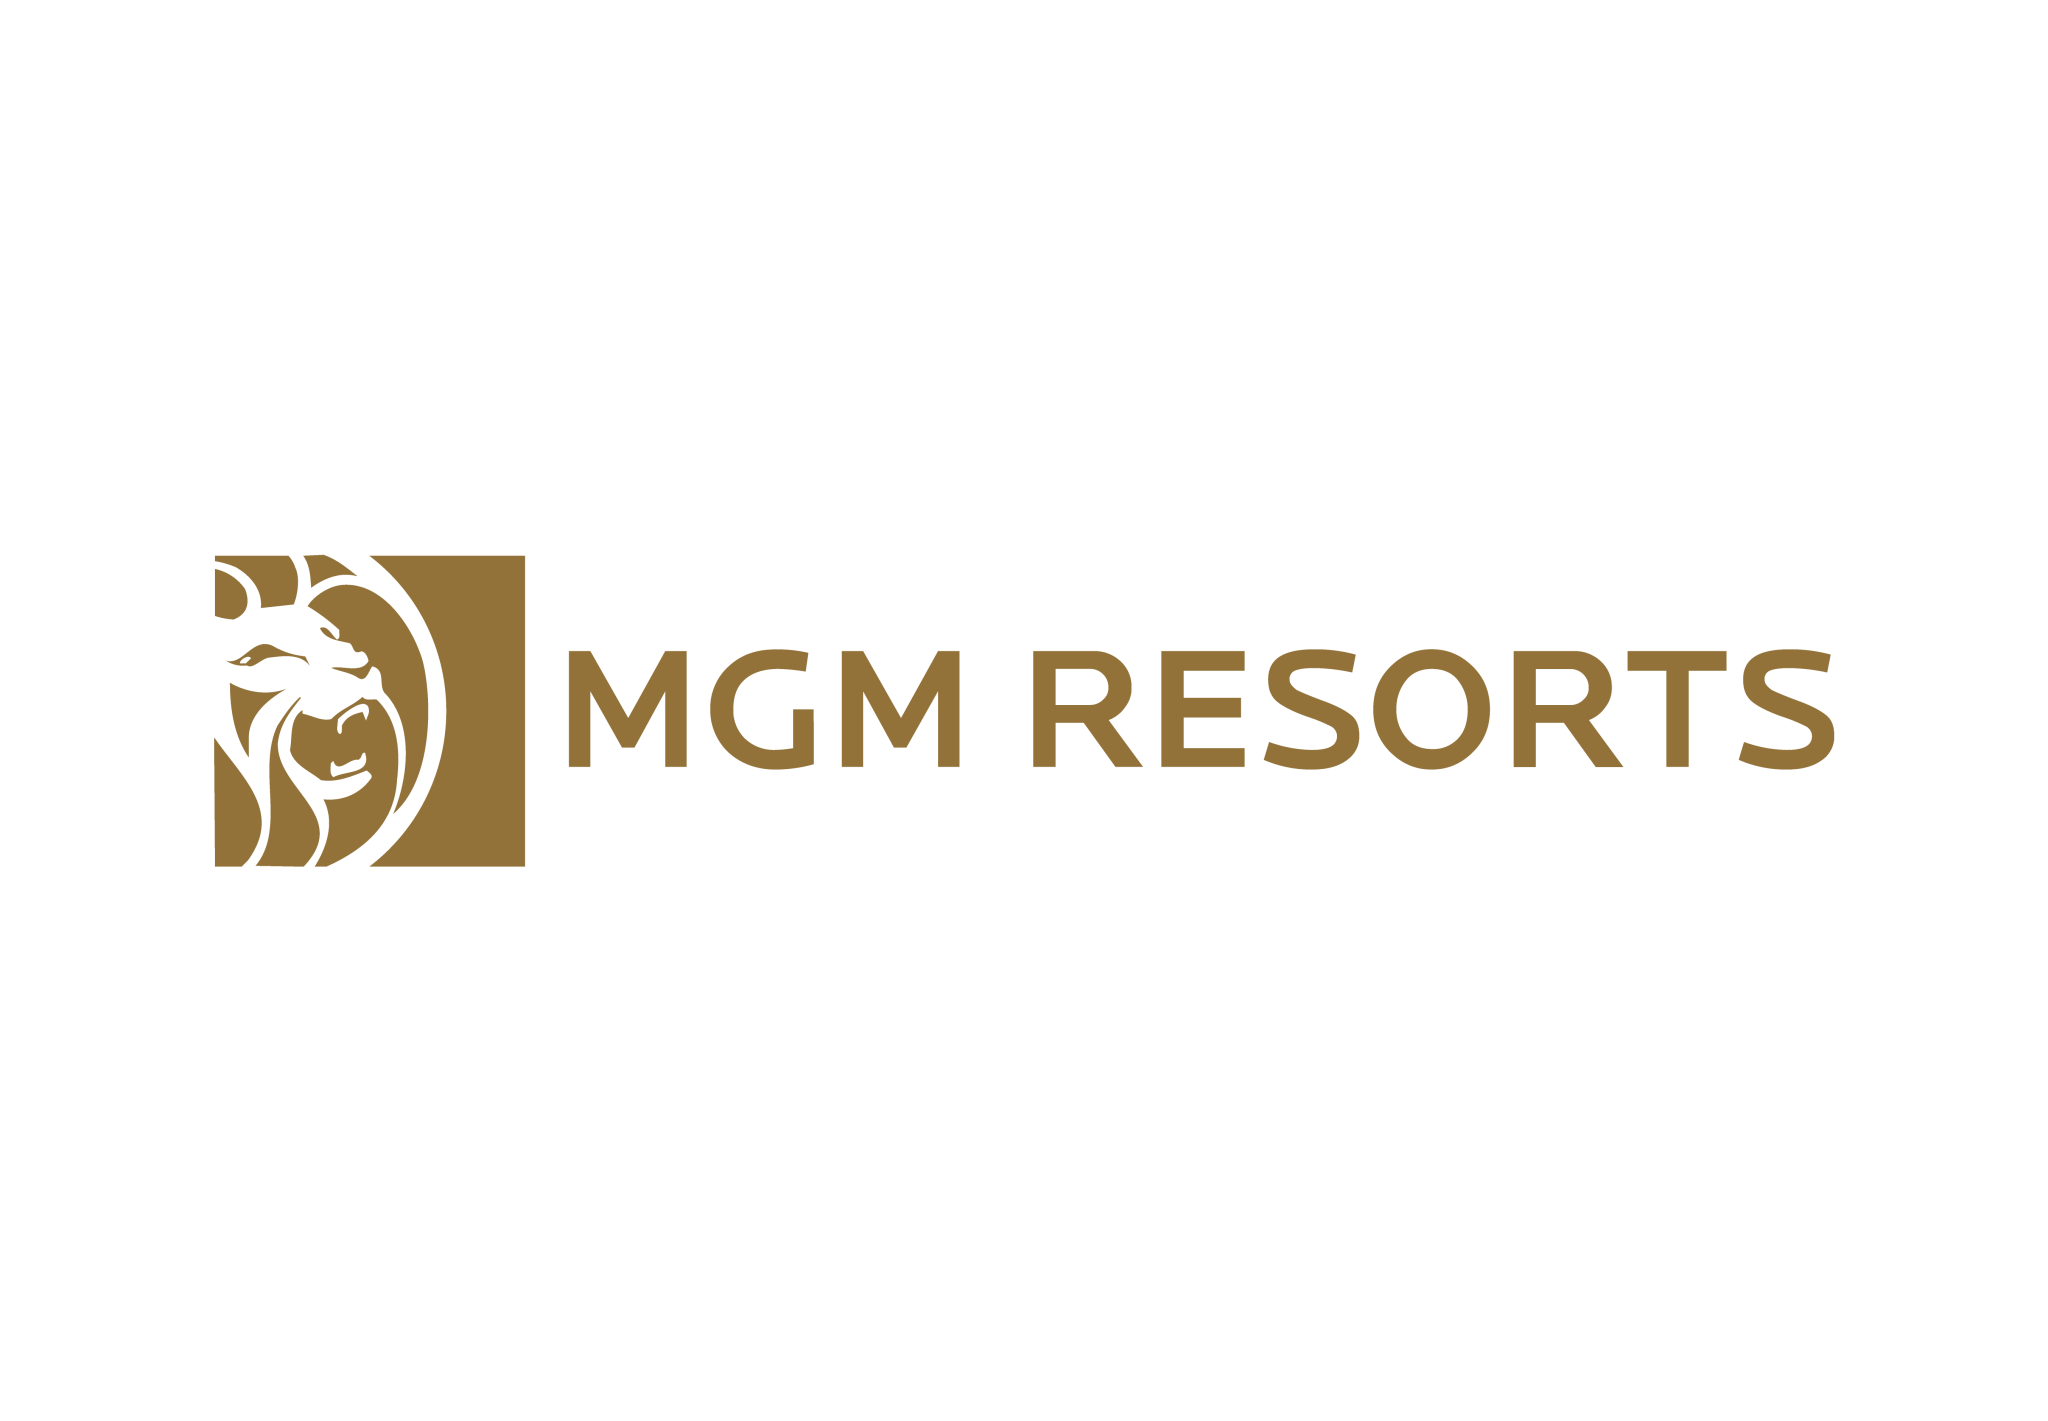 does mgm resorts have a crypto currency coin